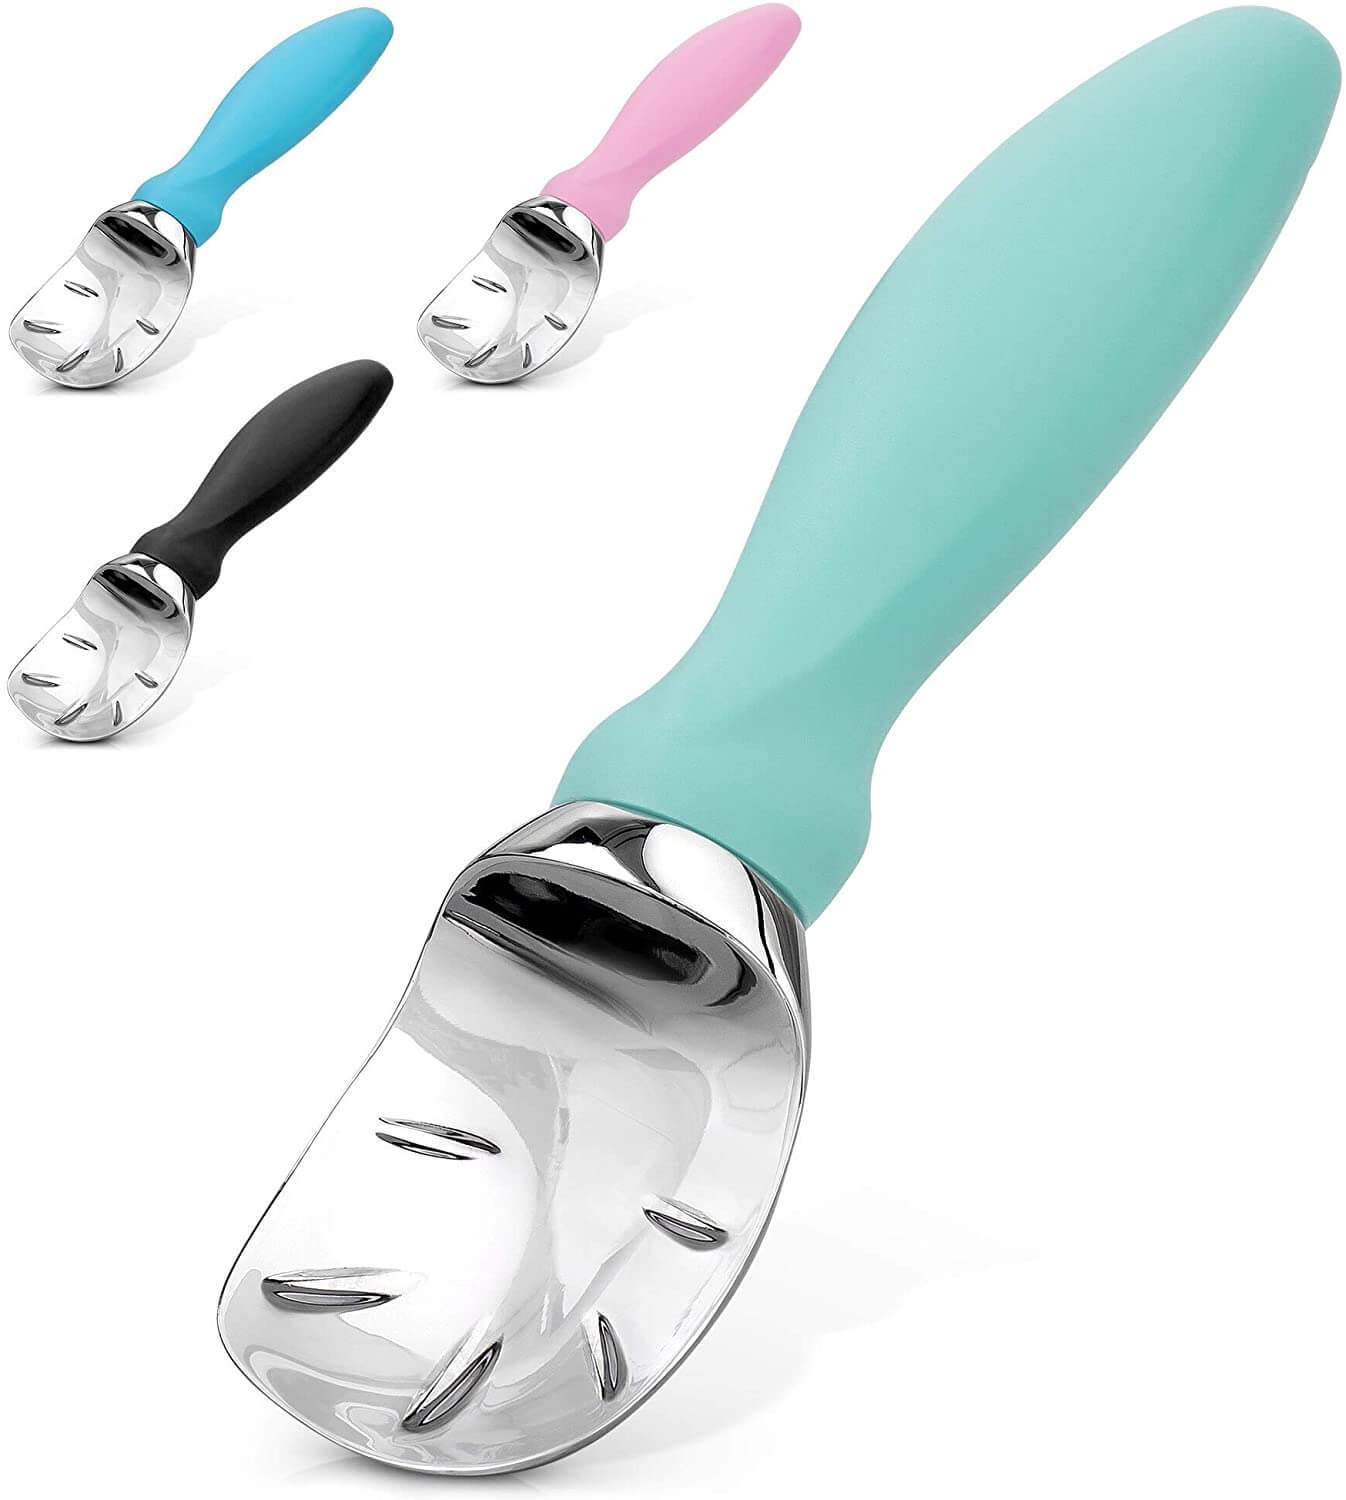 Portion Scoop Durable Cookie Scoop With Silicone Handle Stainless Steel NEW